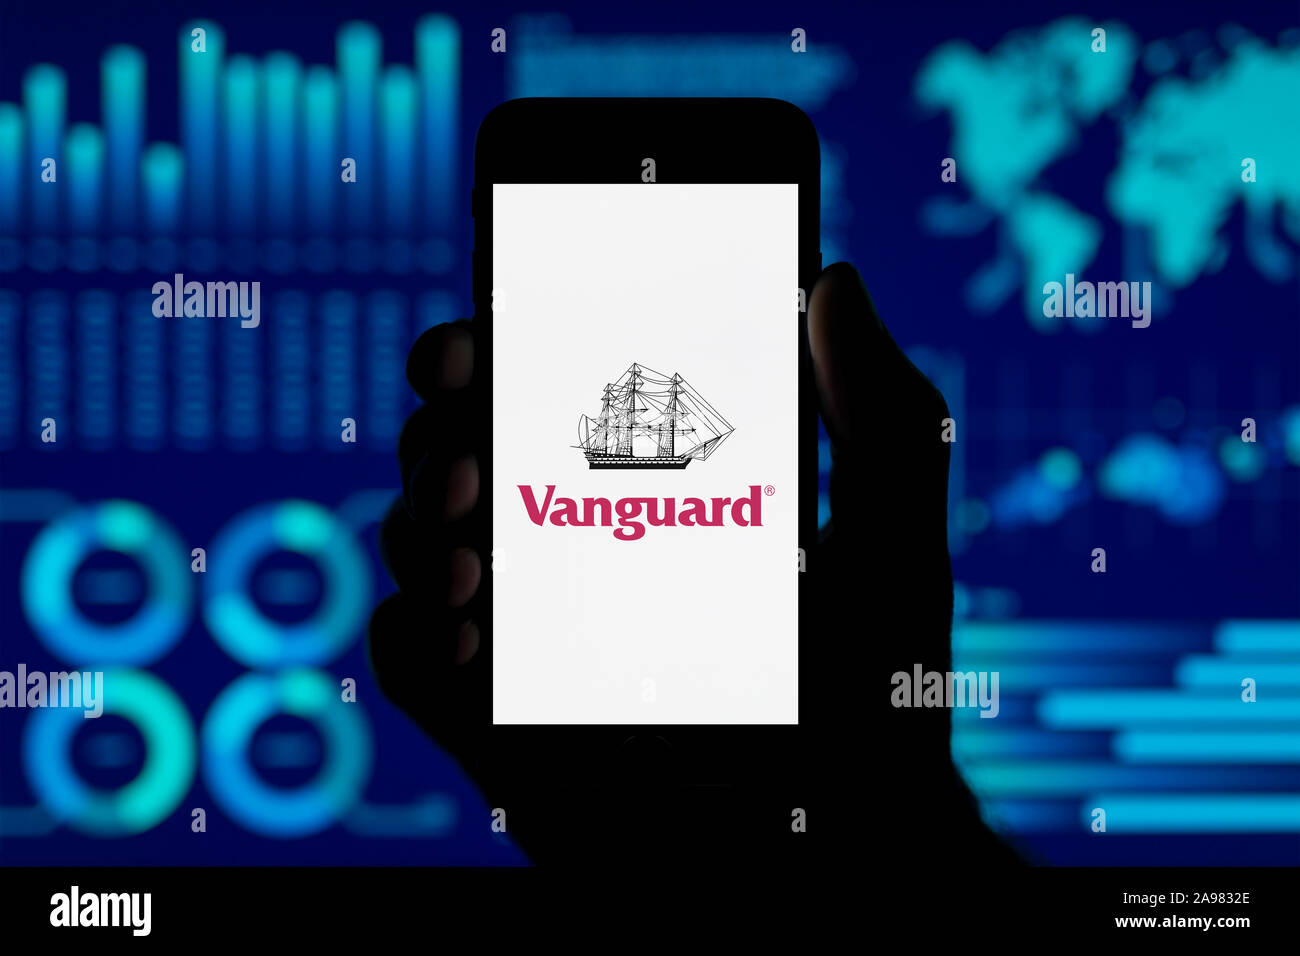 A man holds up an iPhone which displays the Vanguard Group logo, shot against a data visualisation style background (Editorial use only). Stock Photo